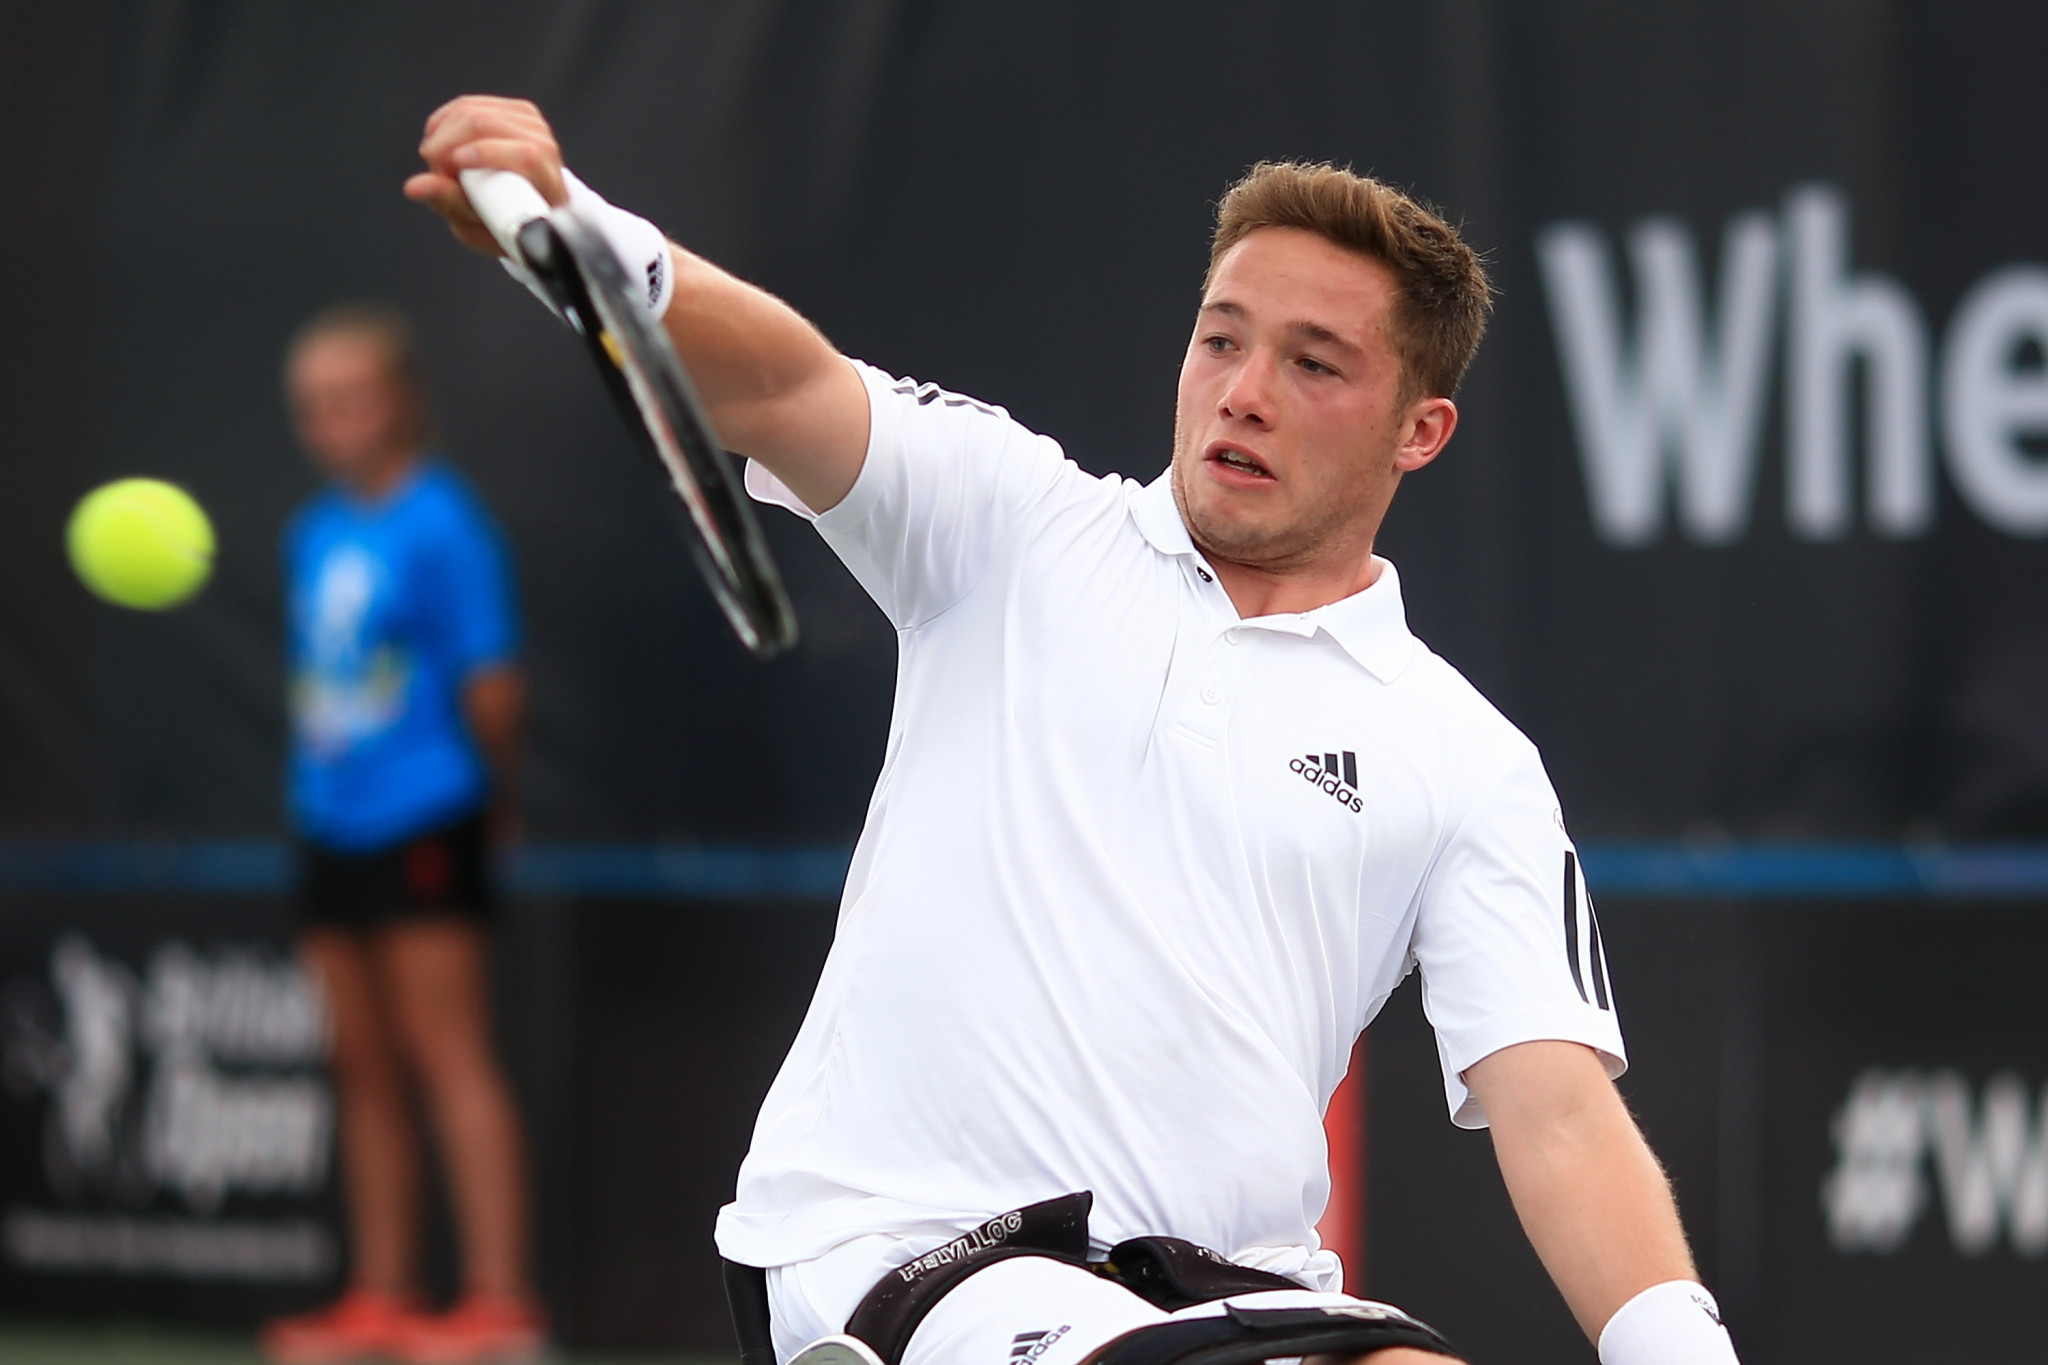 Hewett, Van Koot and Wagner warm up for US Open with Super Series titles in St Louis